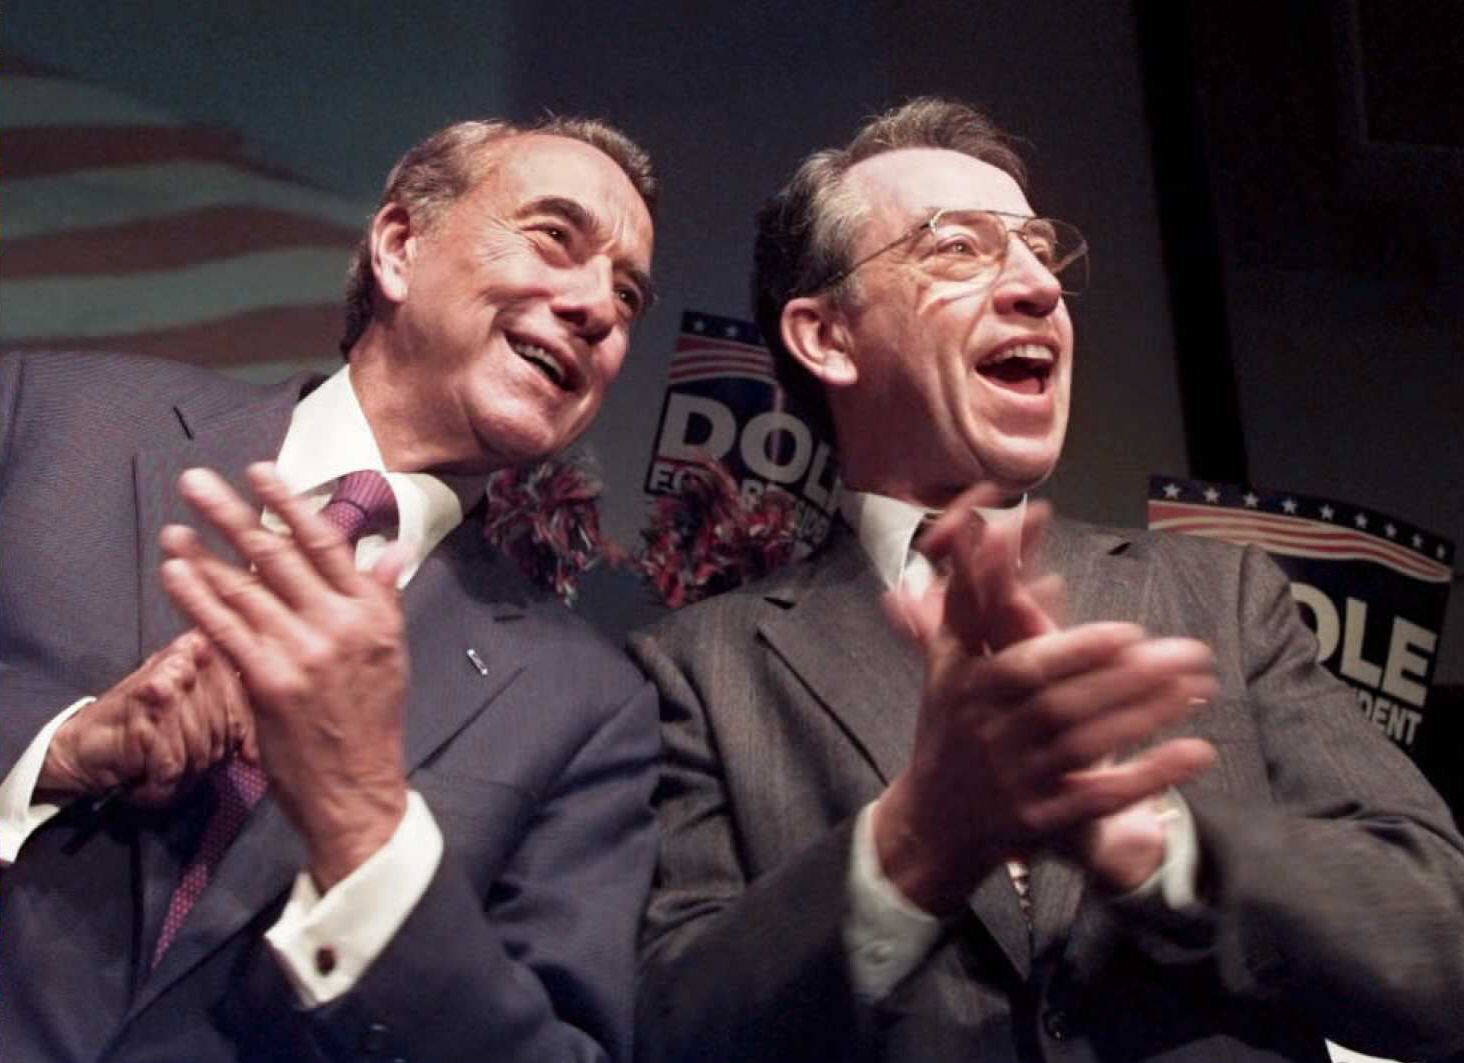 Dole and Grassley